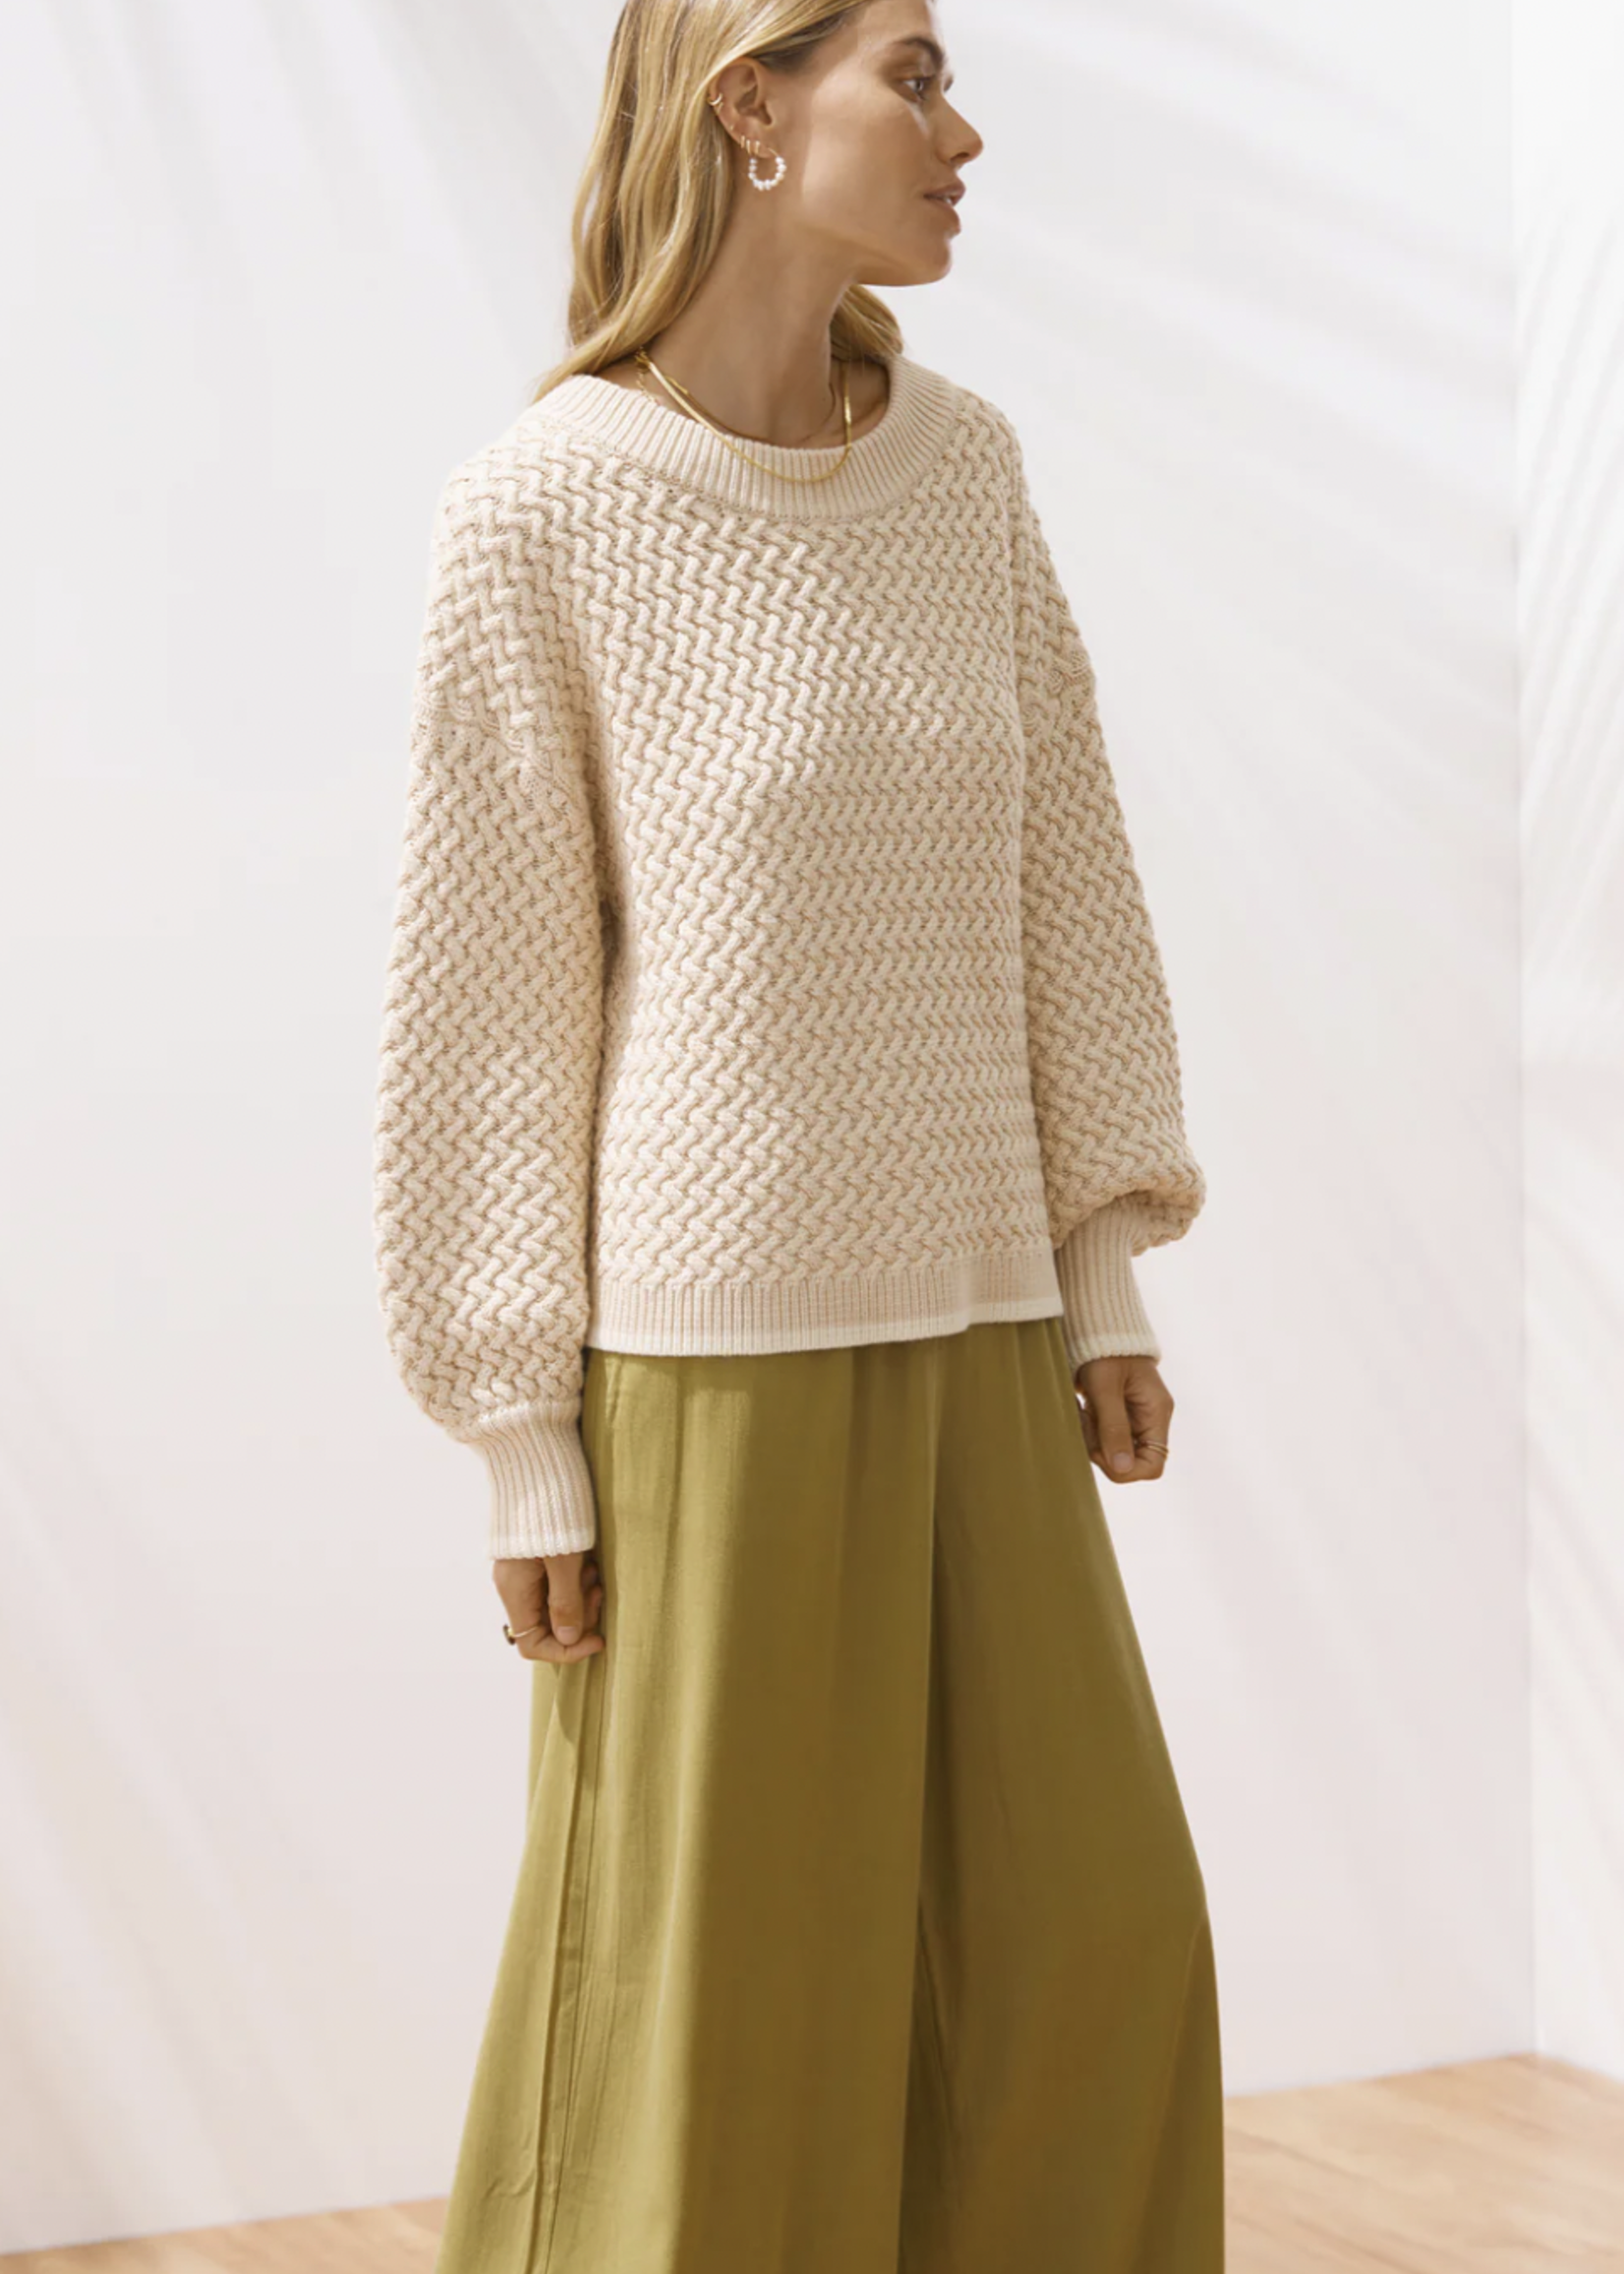 Elitaire Boutique Marisol Jumper in Oatmeal